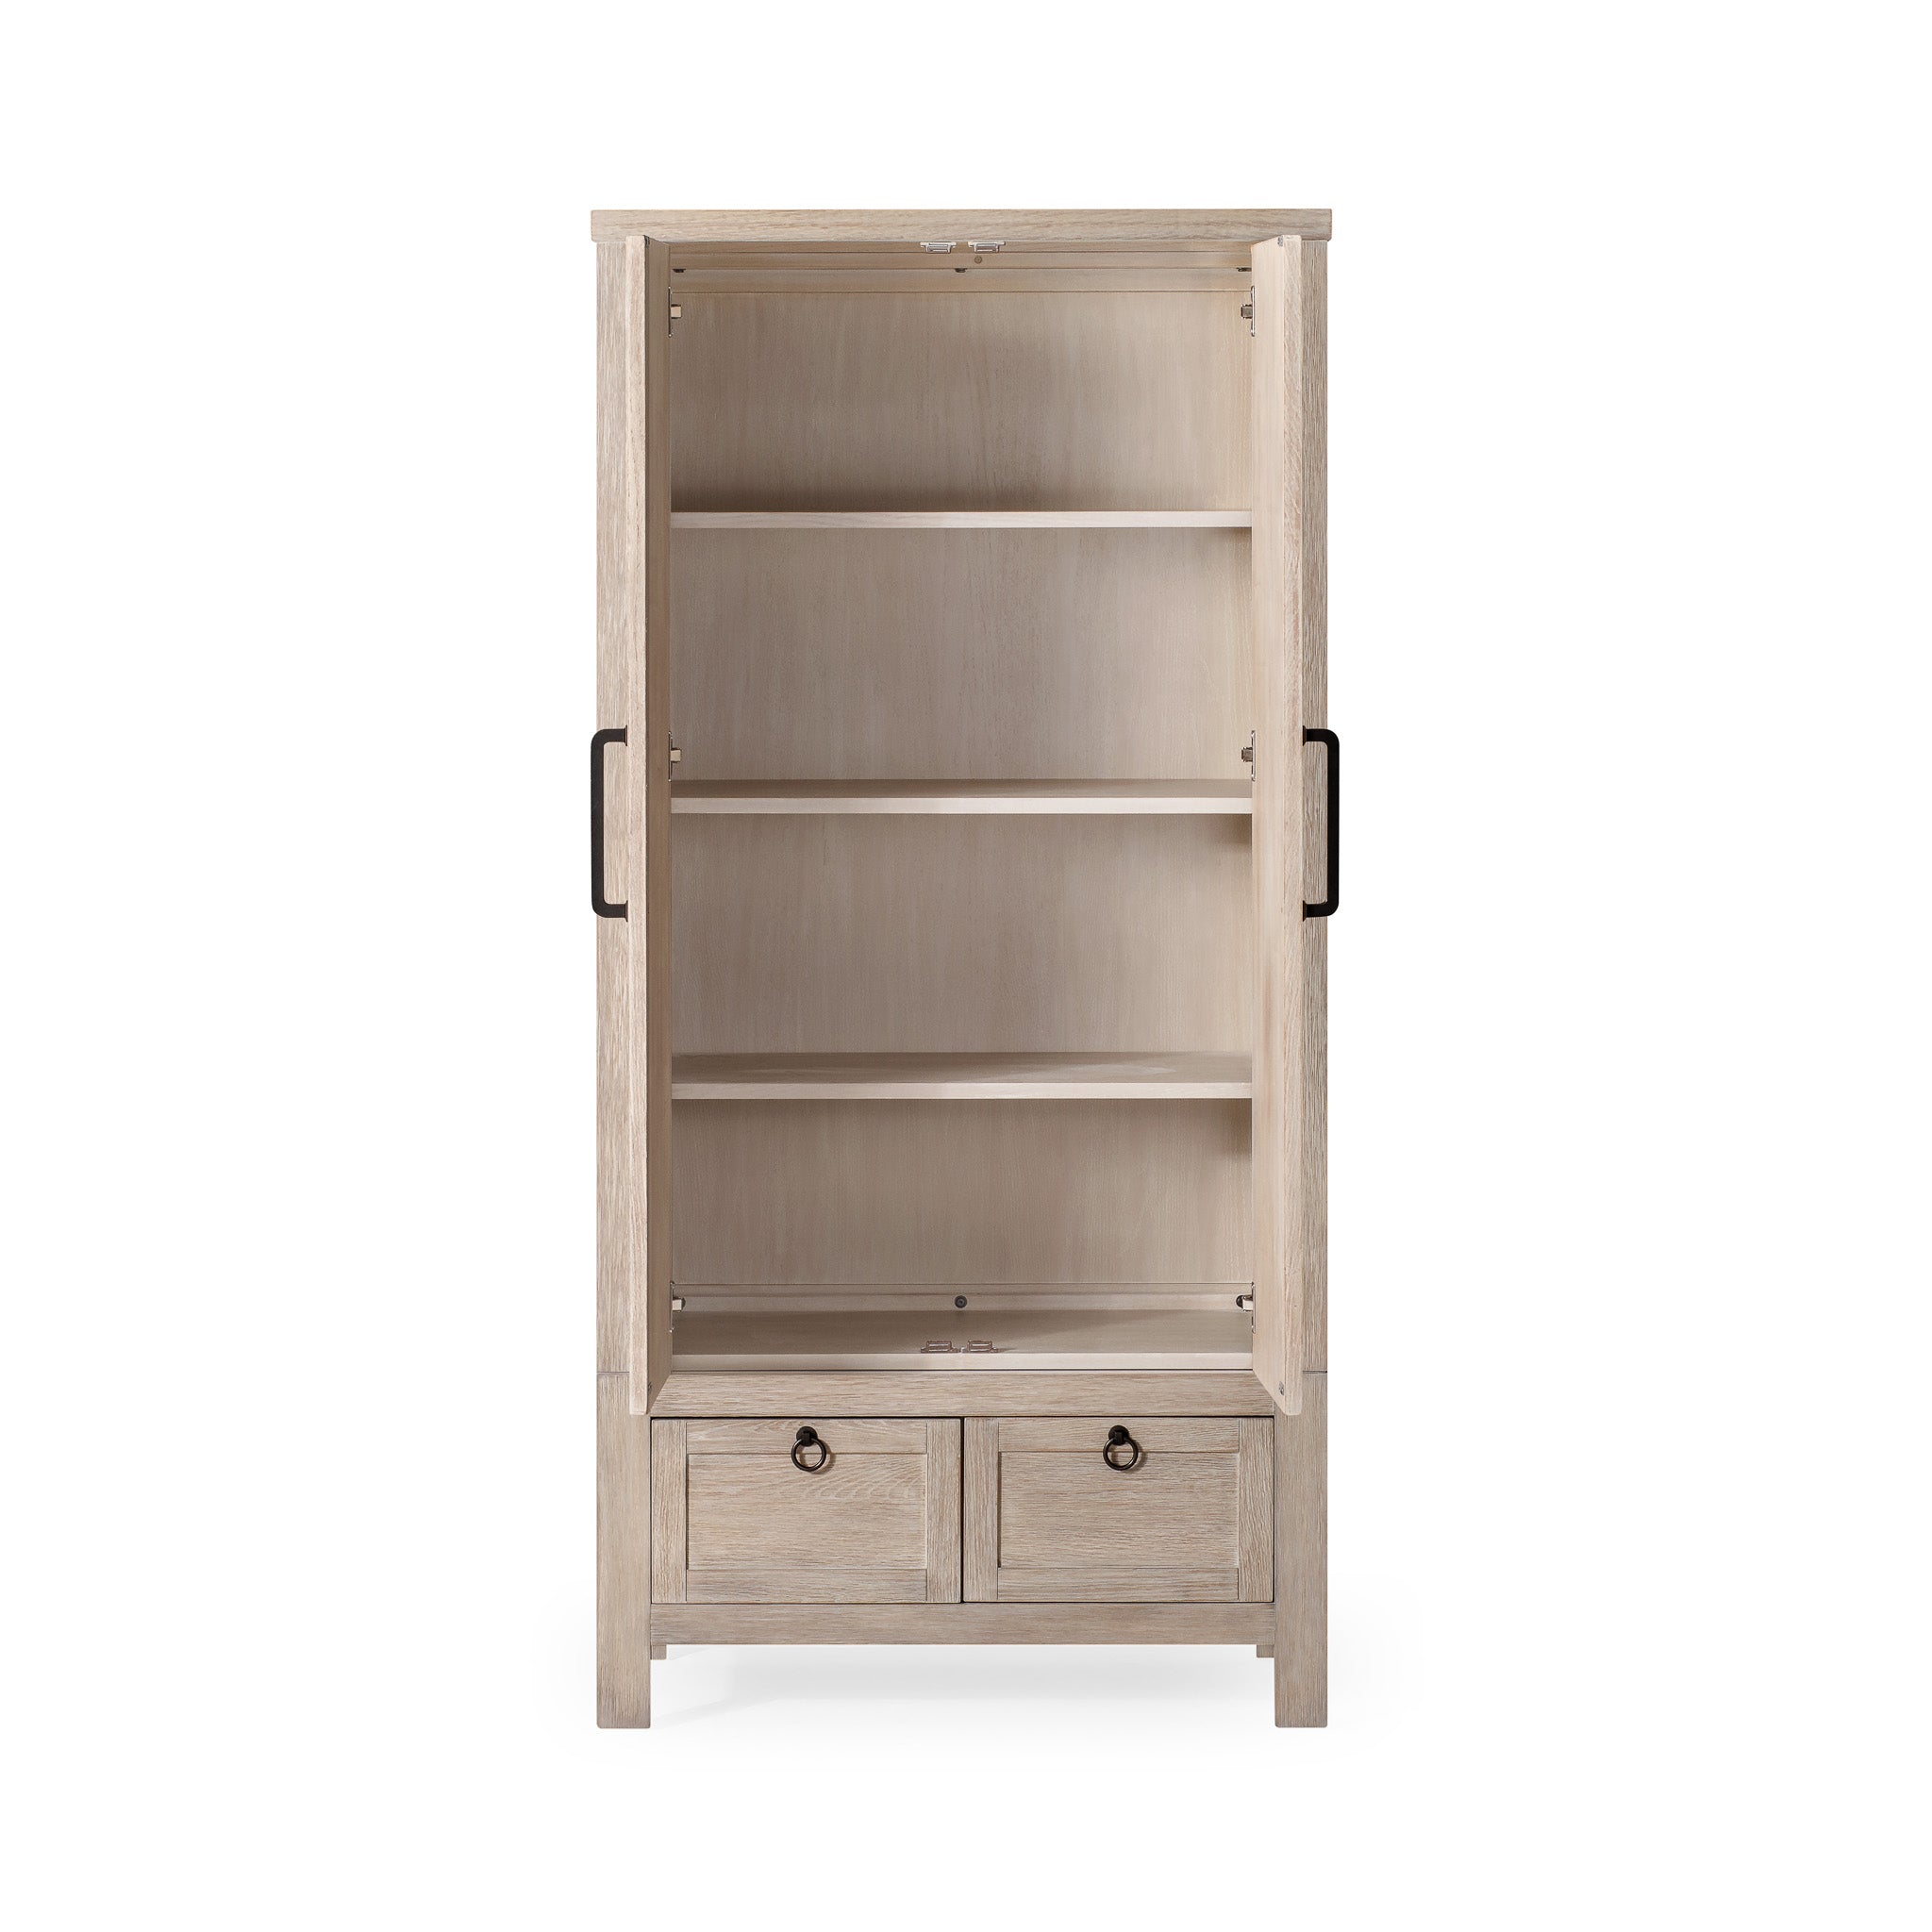 Vaughn Organic Wooden Cabinet in Weathered White Finish in Cabinets by Maven Lane